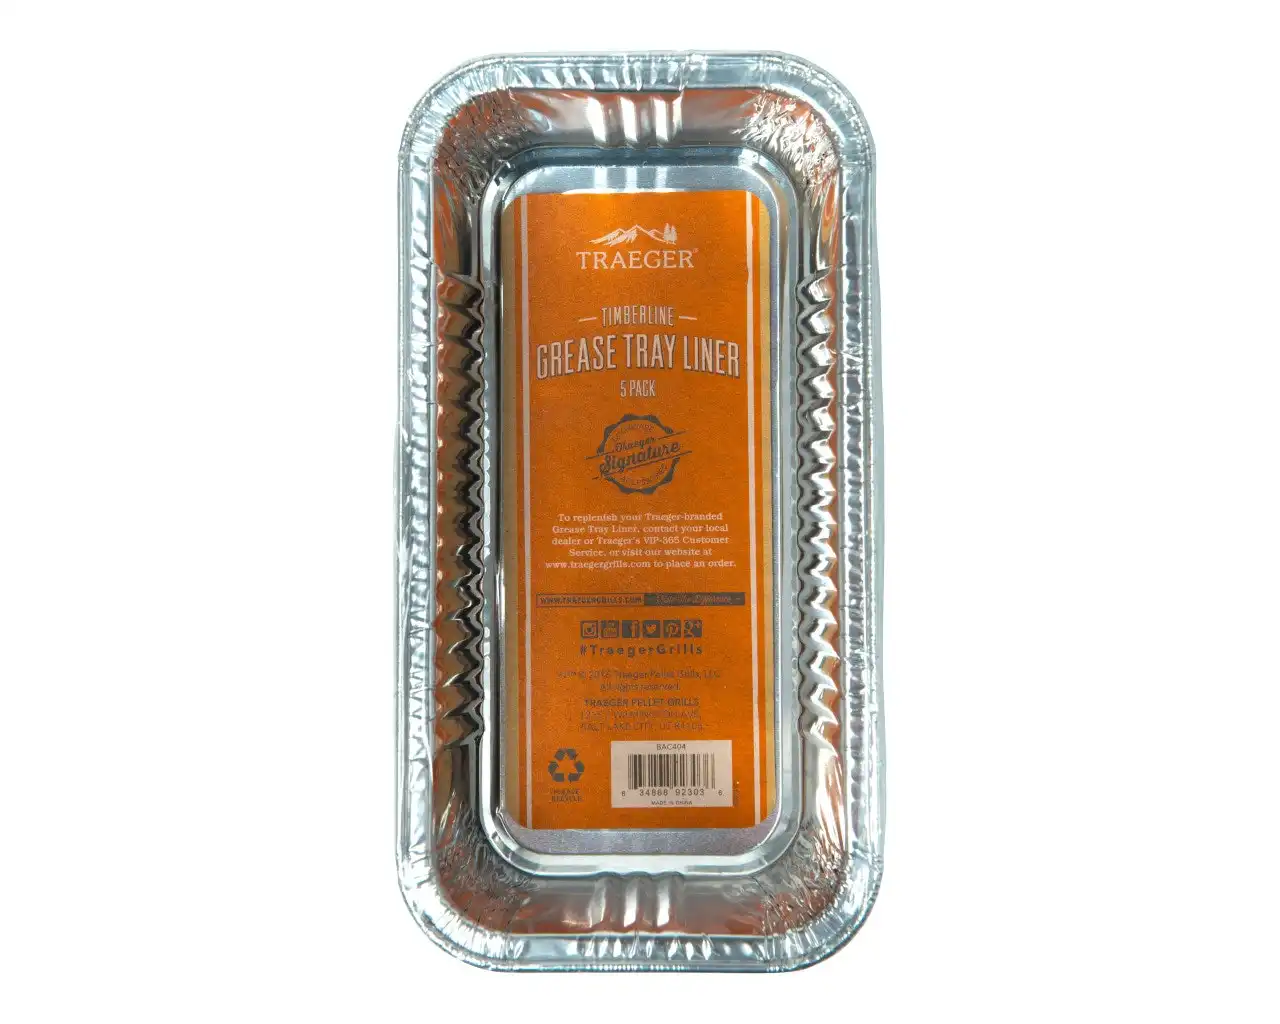 Traeger Timberline Grill Grease Pan Liner - 5 pack